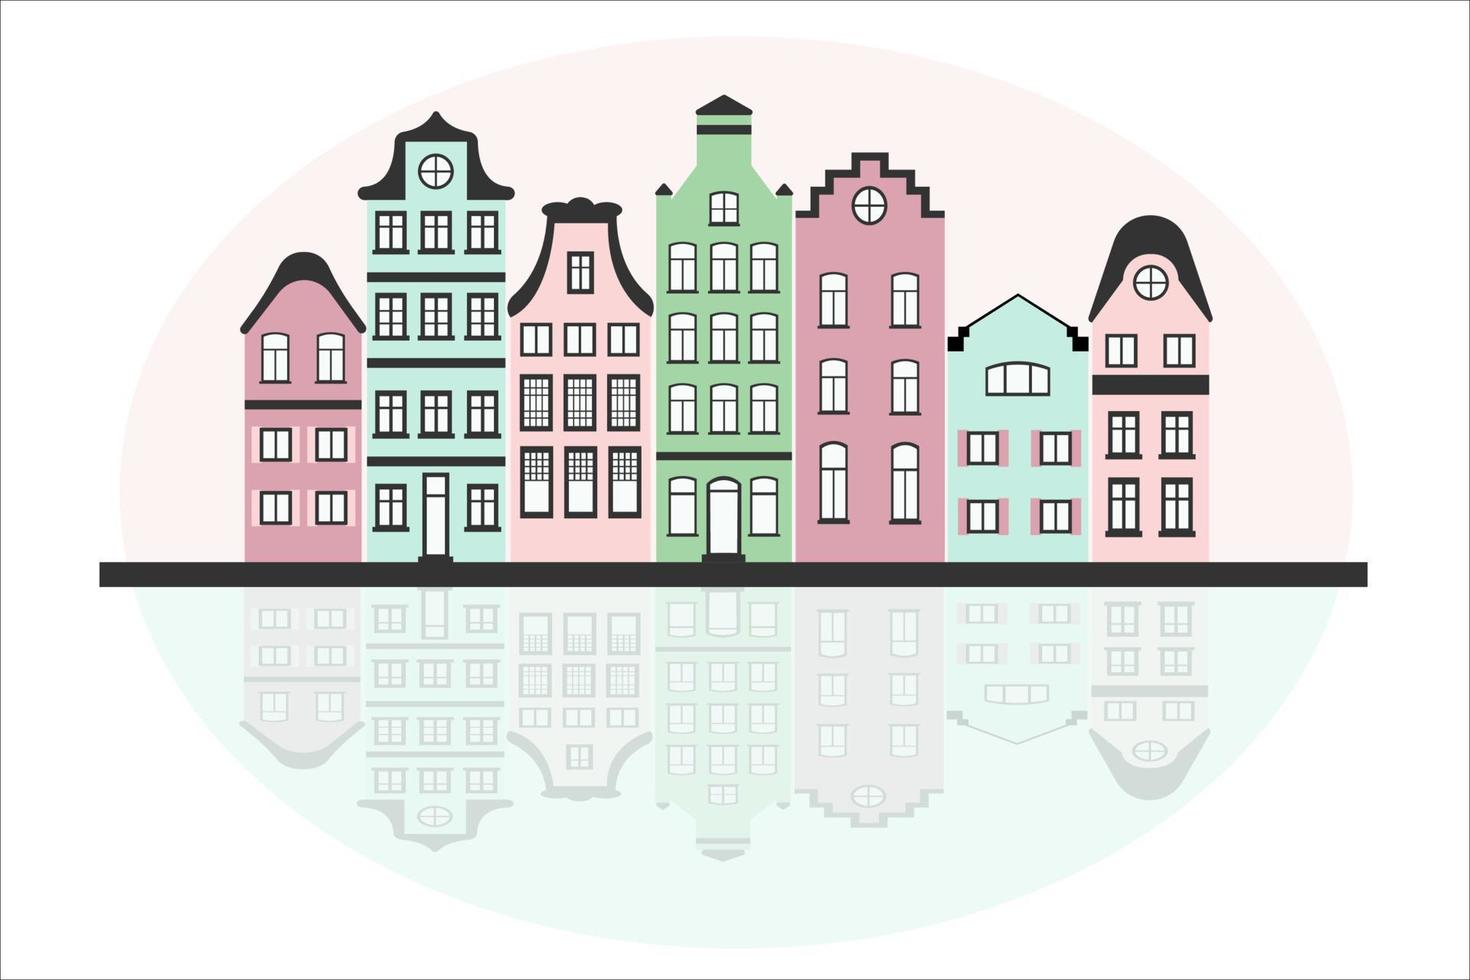 Flat illustration of Amsterdam street, the Netherlands. Stylized facades of old buildings in pastel colors. Reflection of houses in the river vector